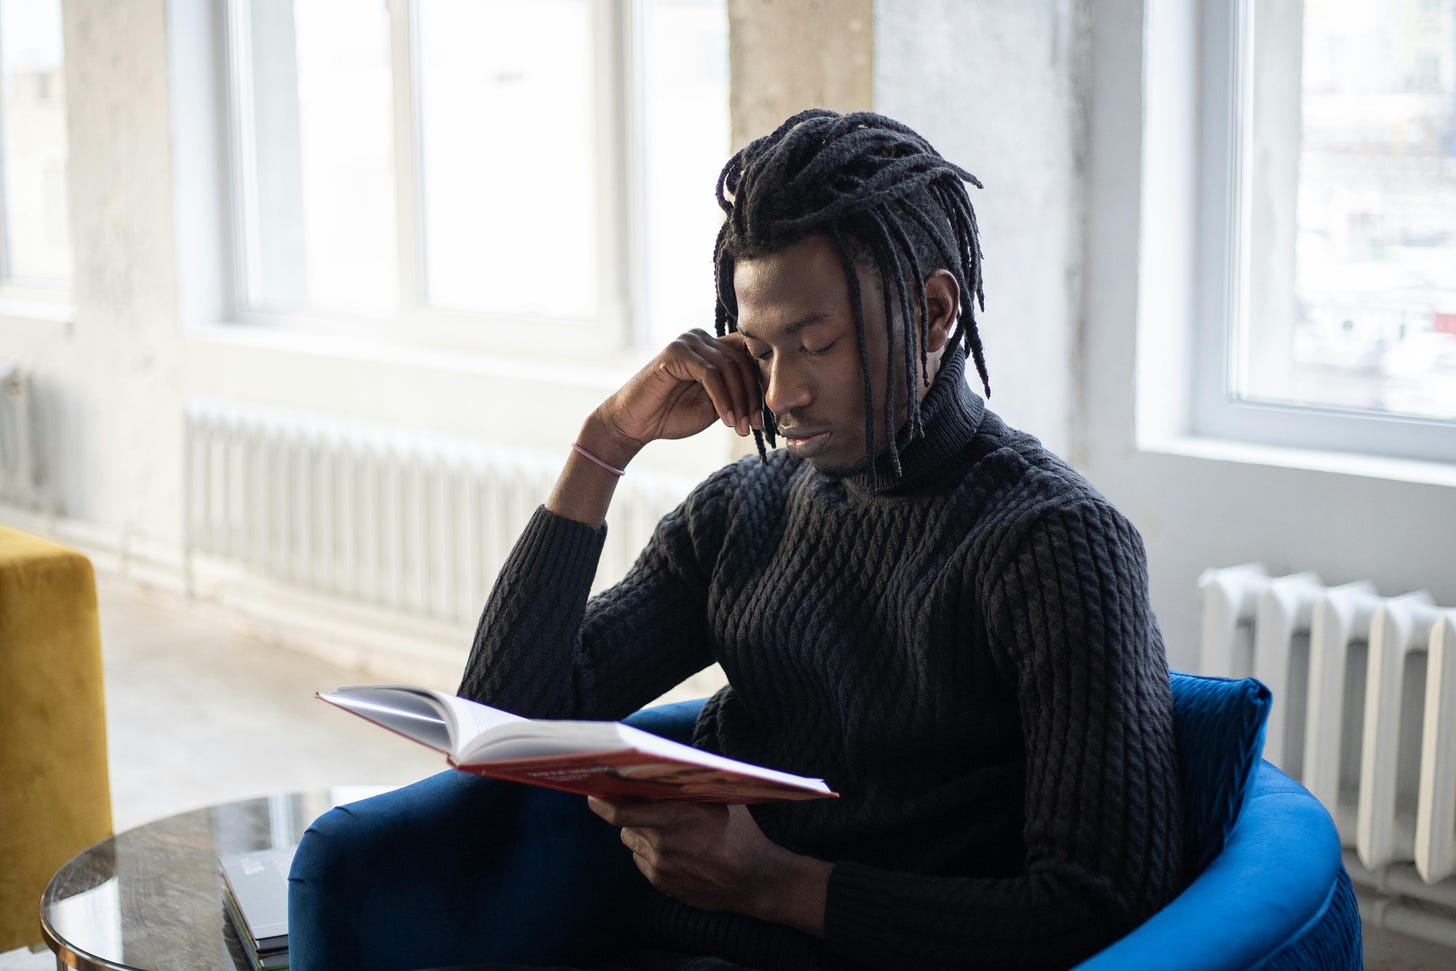 A young Black man with 'locs sitting in a chair and reading a book.